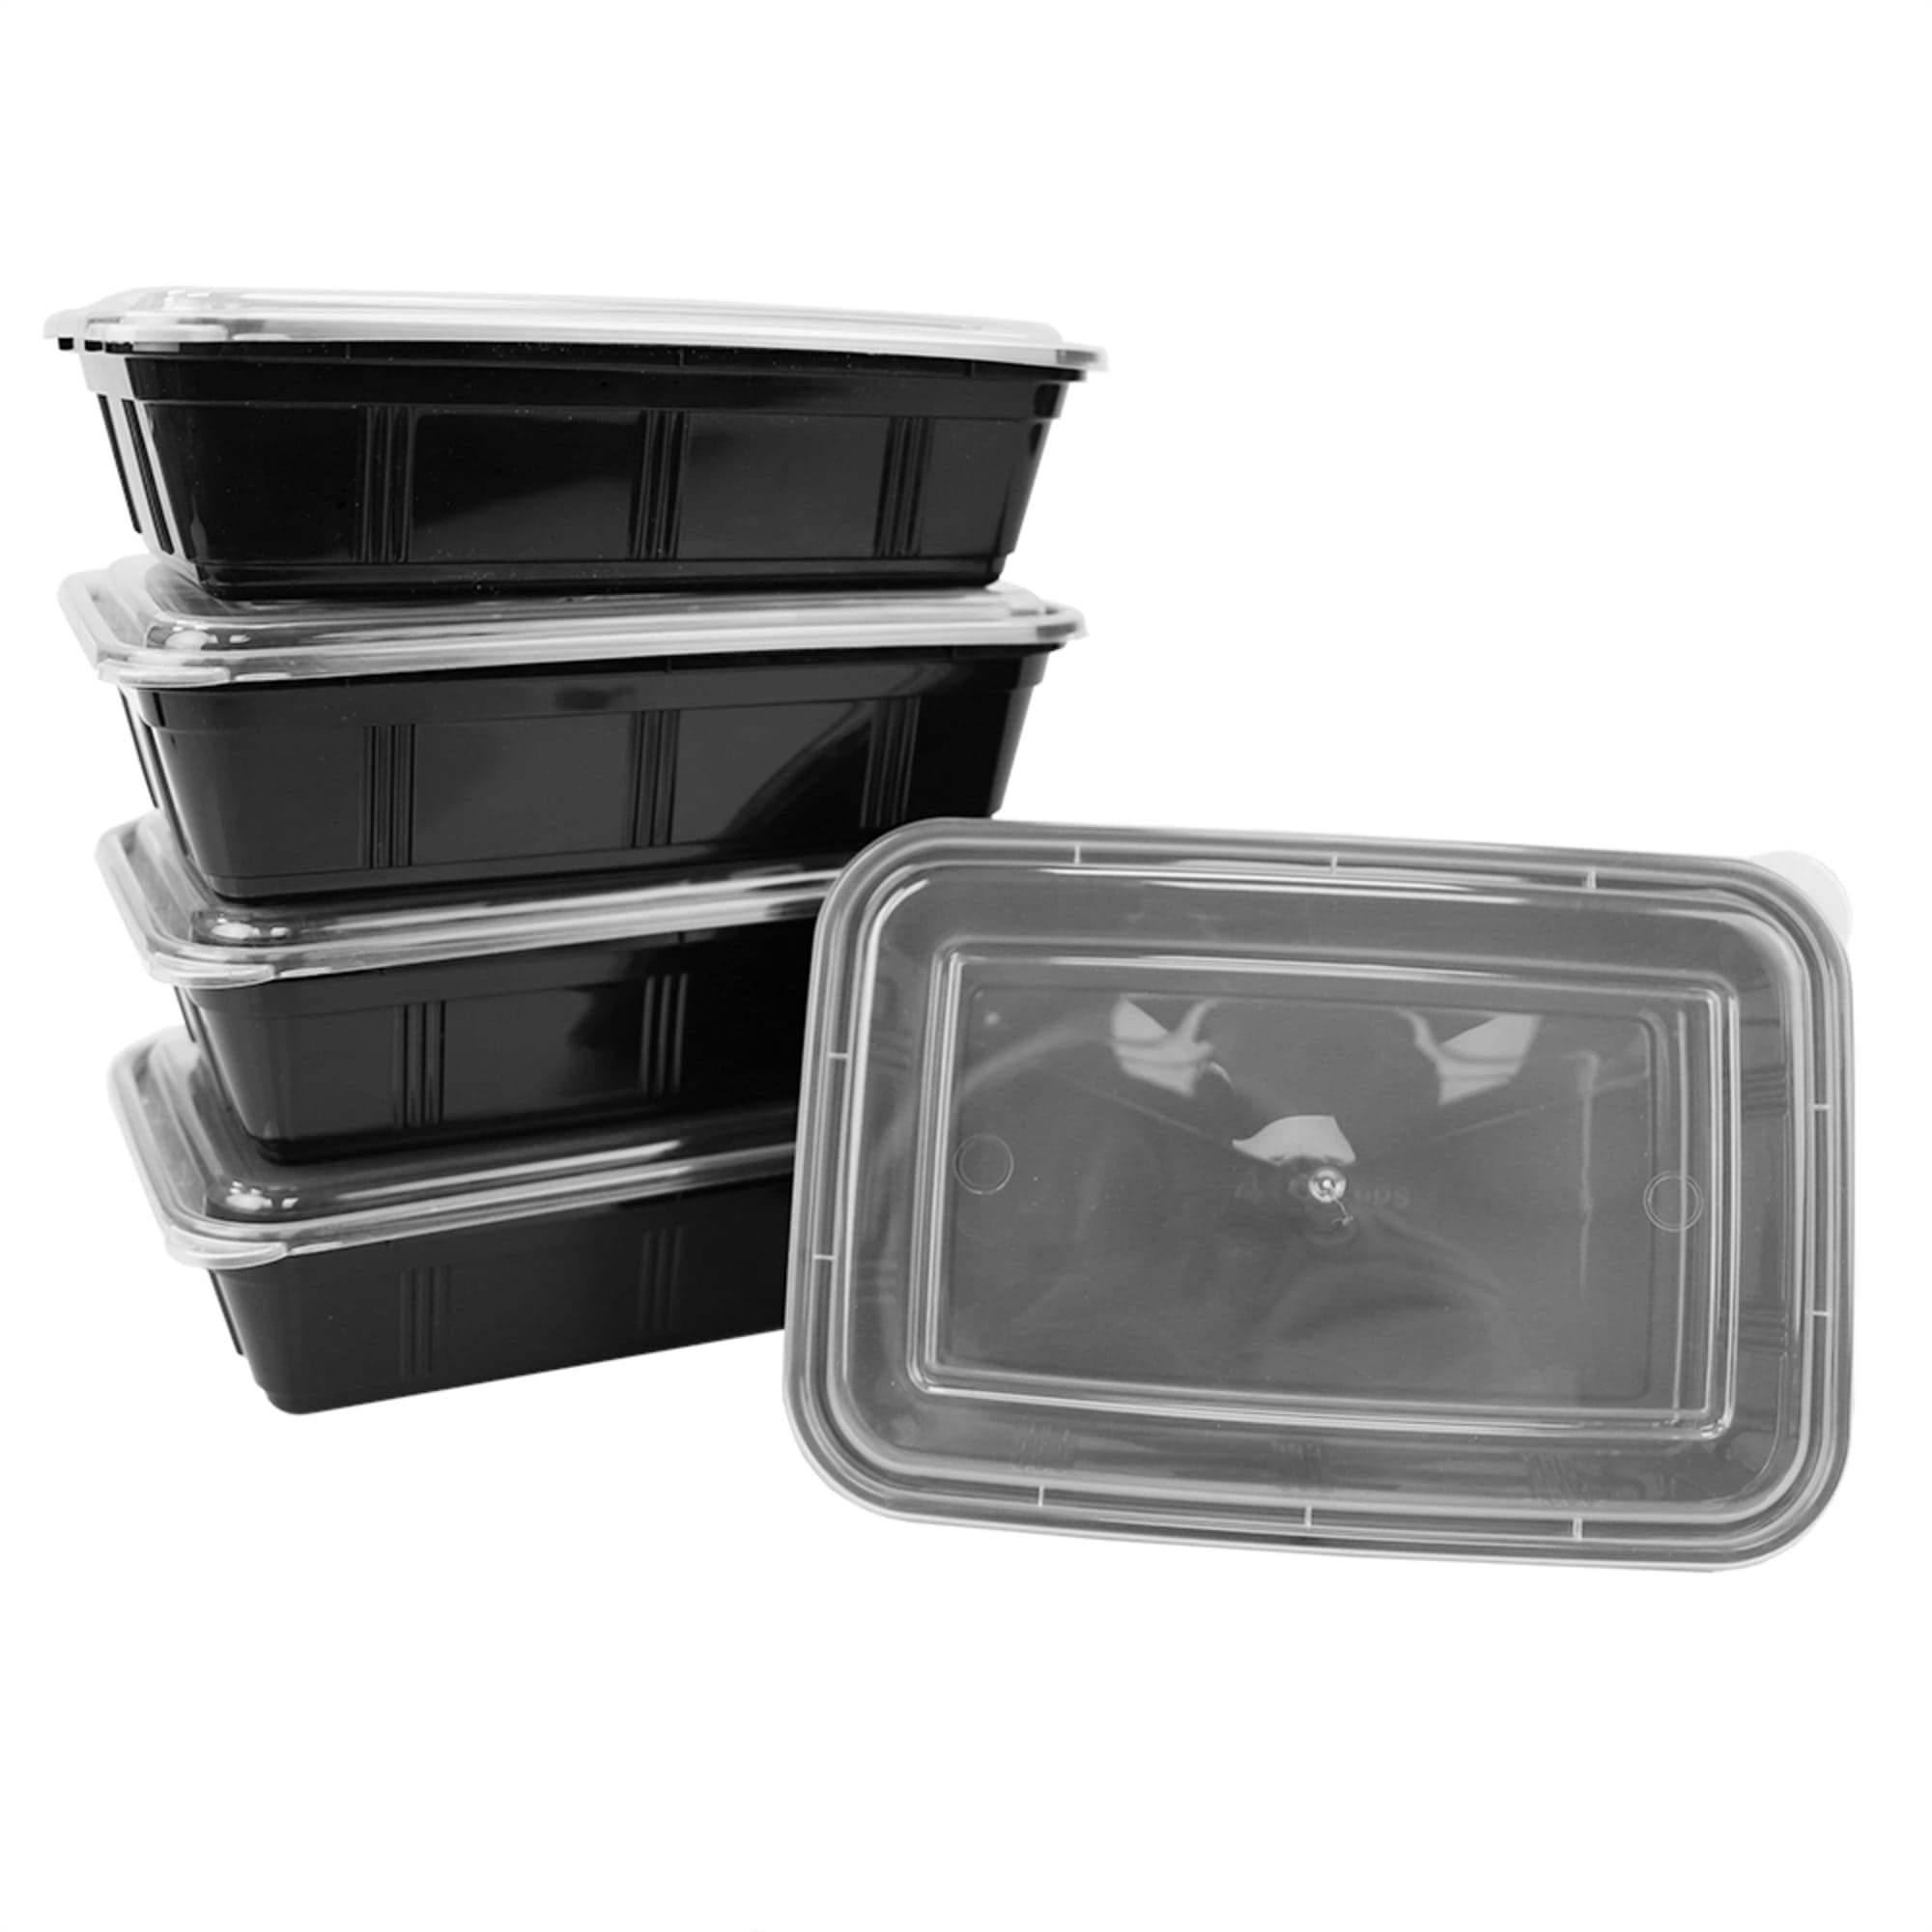 Home Basic 10 Piece BPA-Free Plastic Meal Prep Containers, Black $3.00 EACH, CASE PACK OF 12